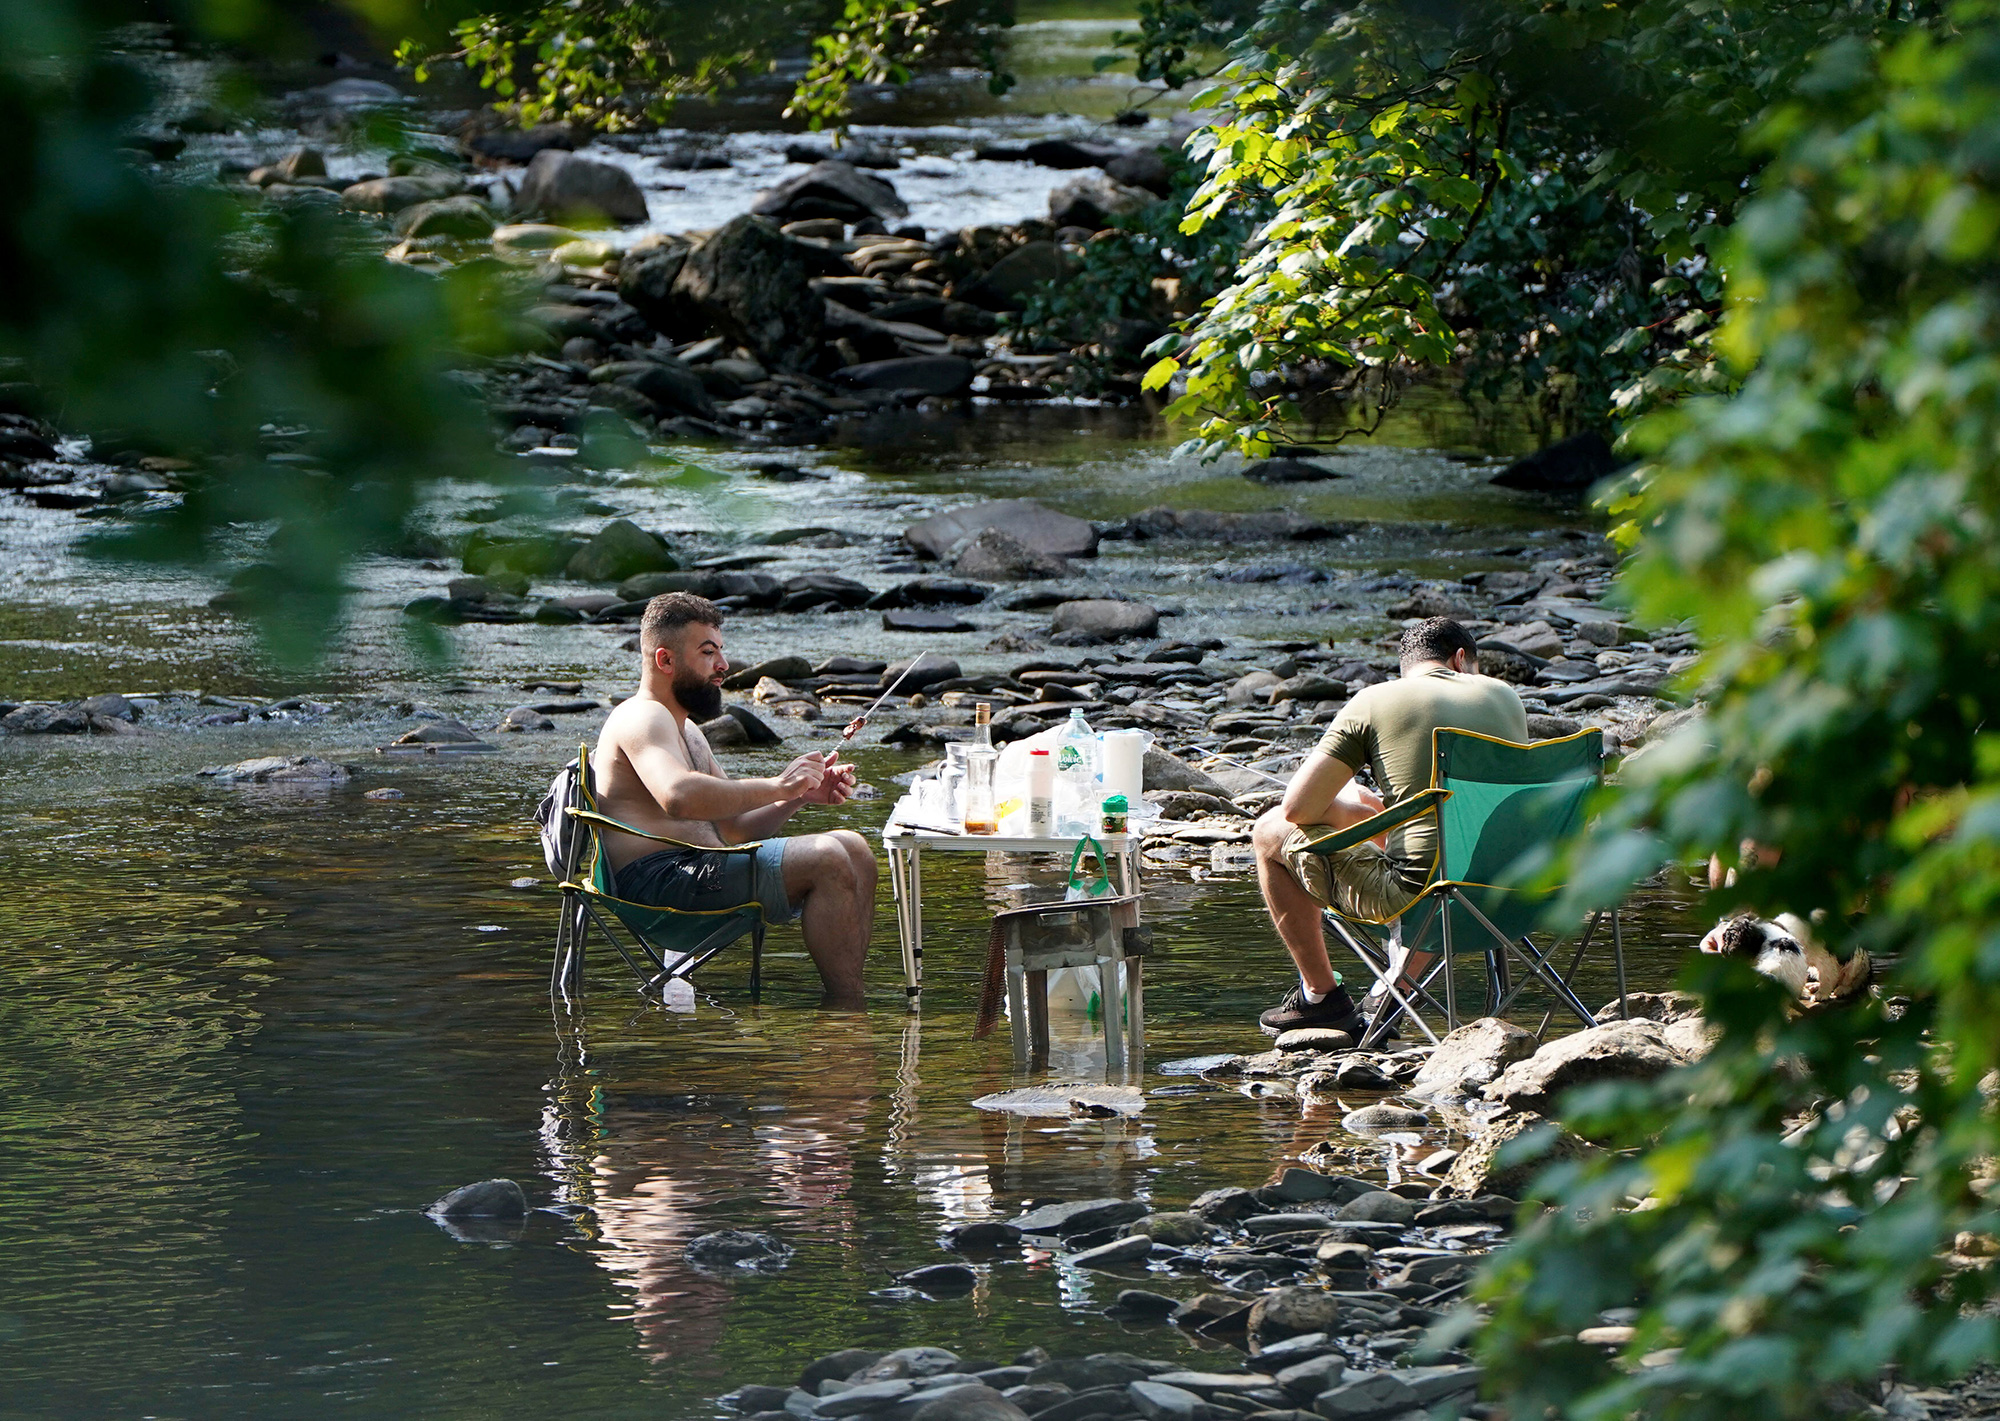 People escape the heatwave by taking a barbecue in a river near the village of Luss in Argyll and Bute on the west bank of Loch Lomond, Scotland, Monday, July 18.